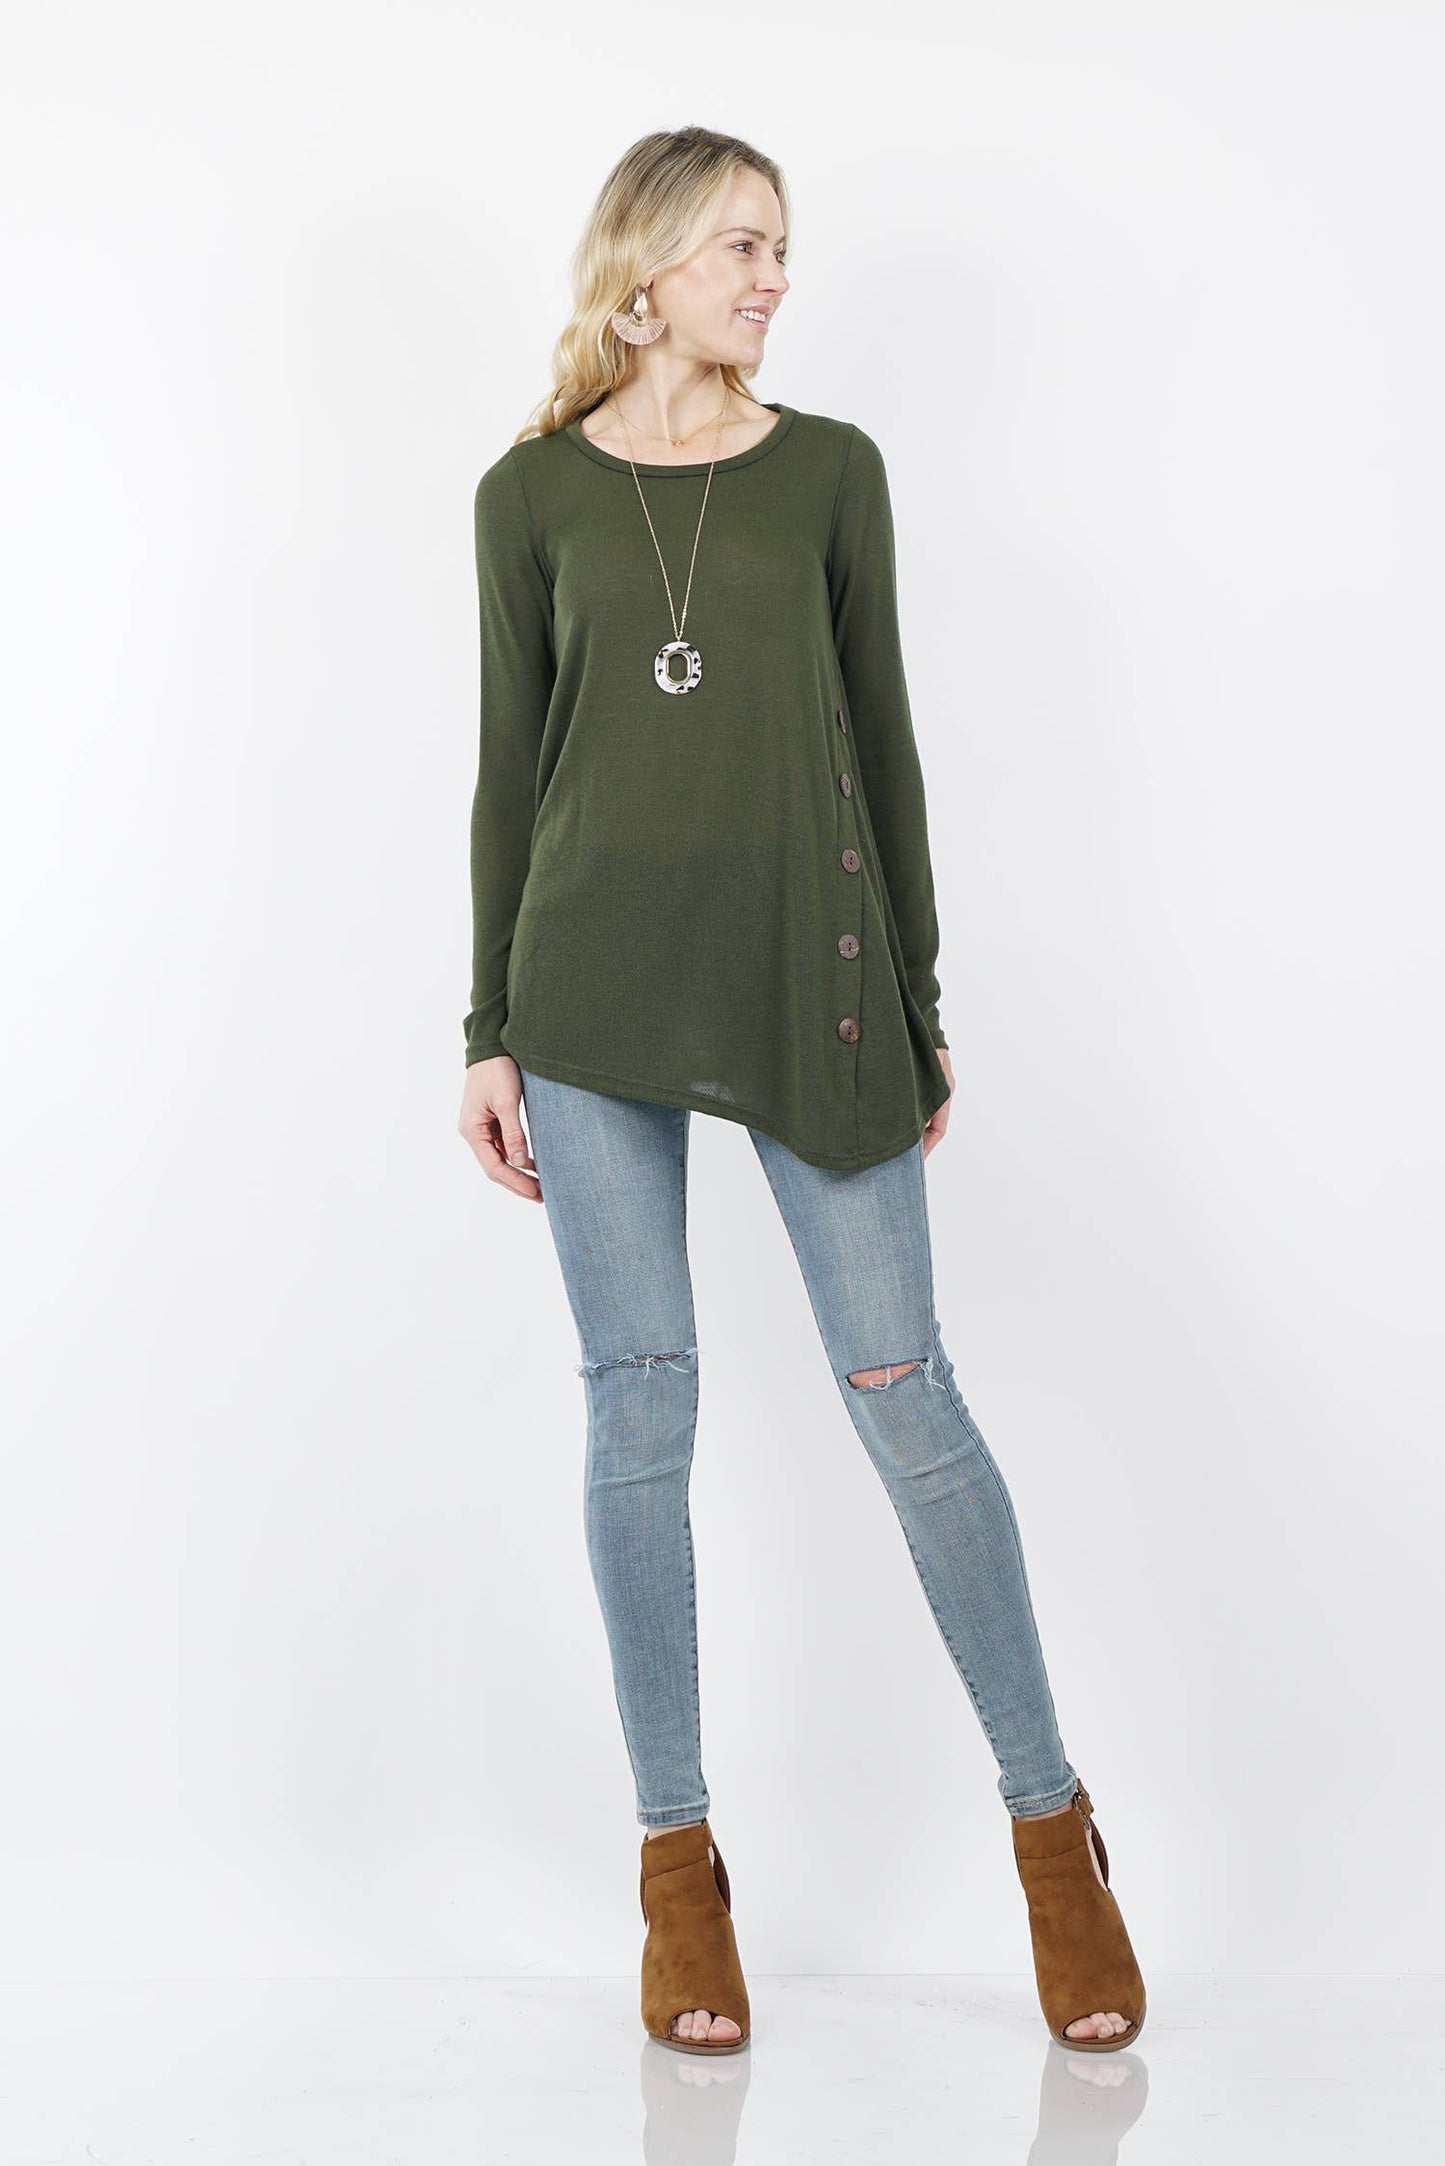 HunterGreen(DK.Olive) Side button cozy knit tunic